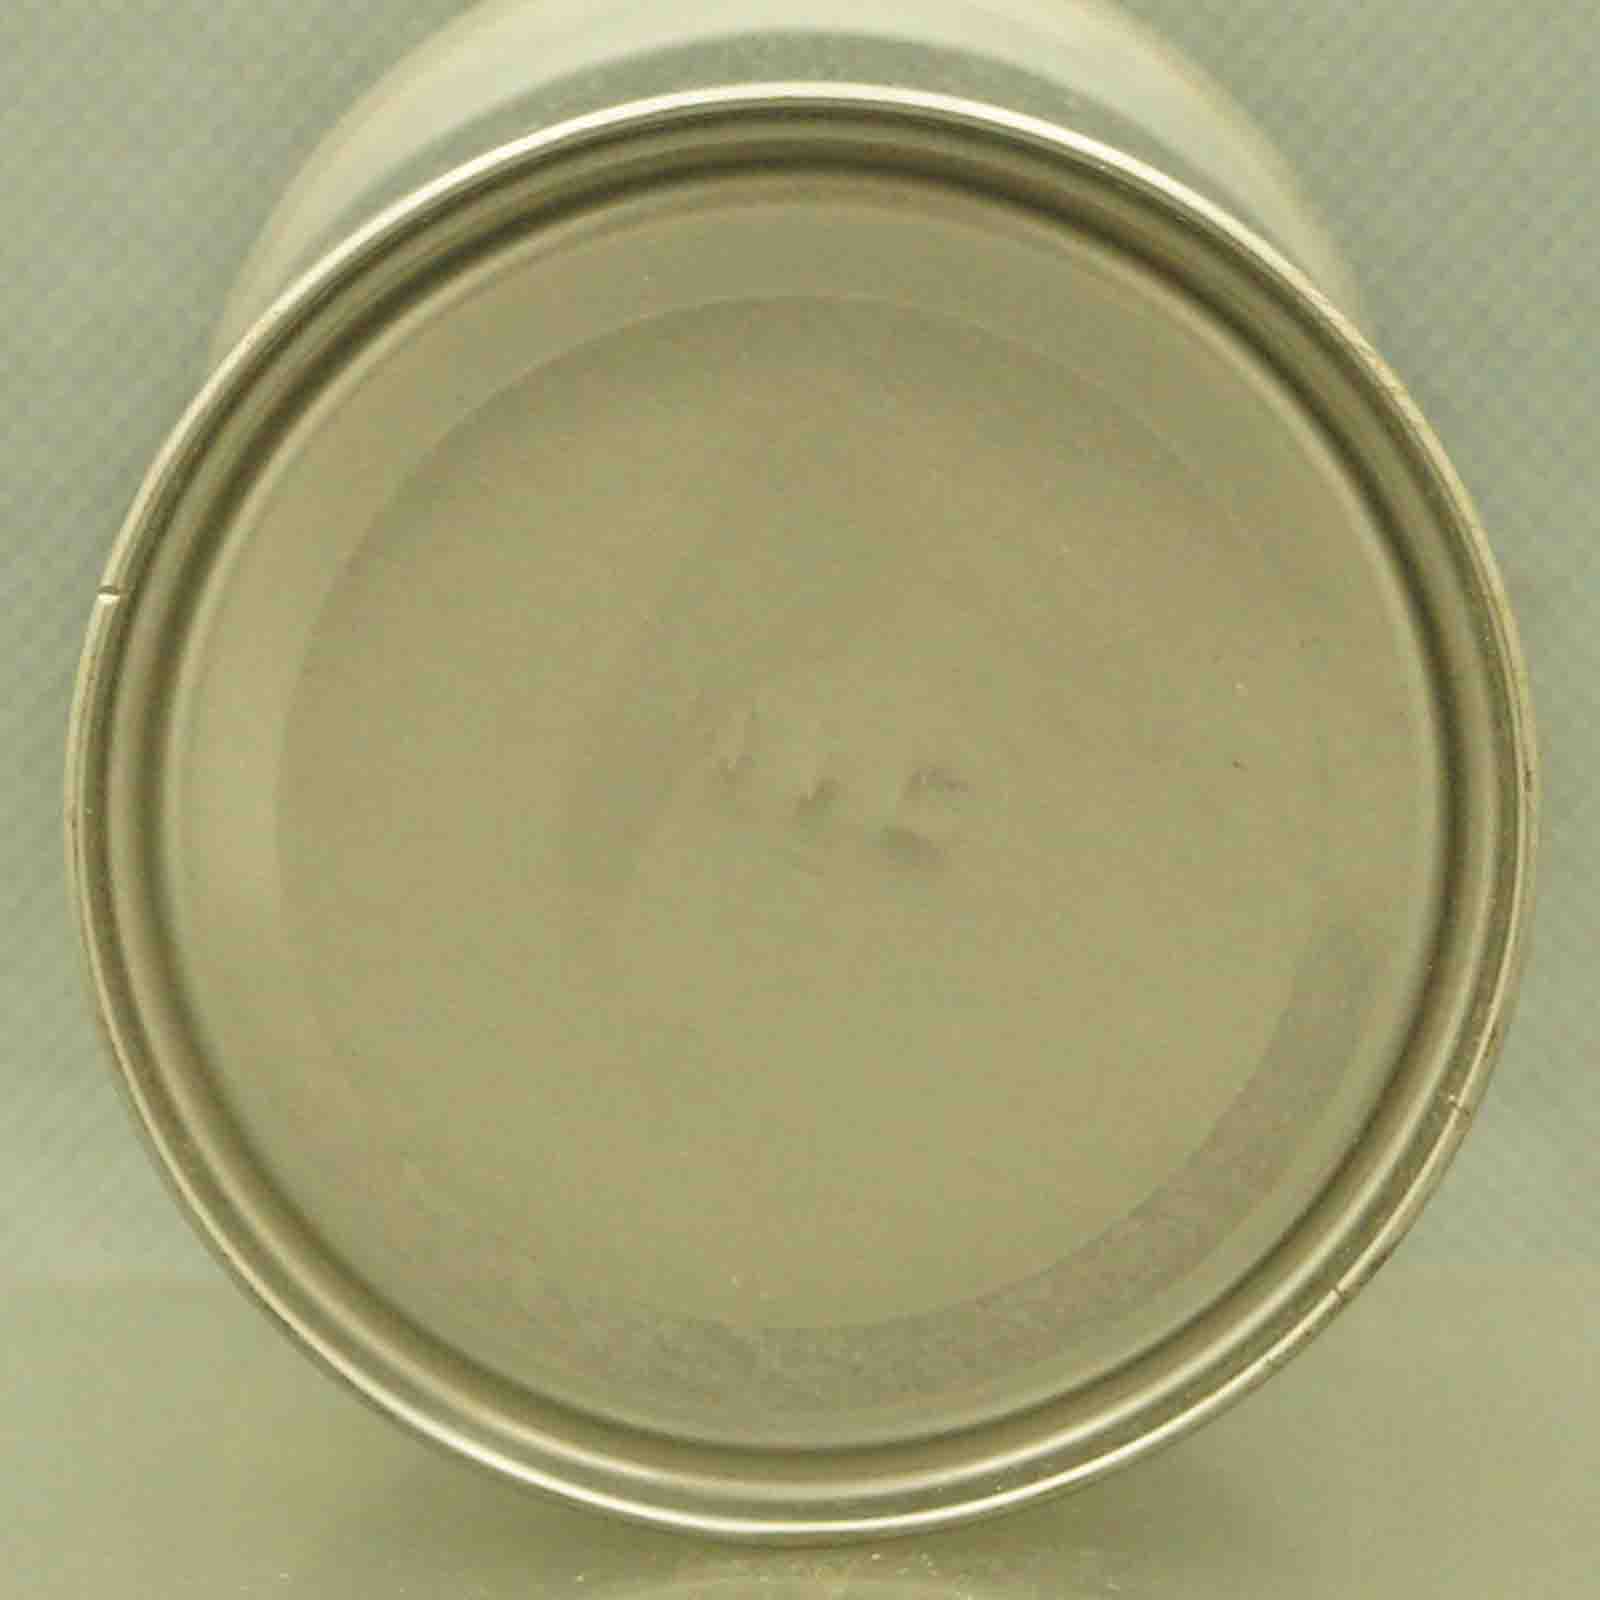 schlitz 121-23 pull tab beer can 6